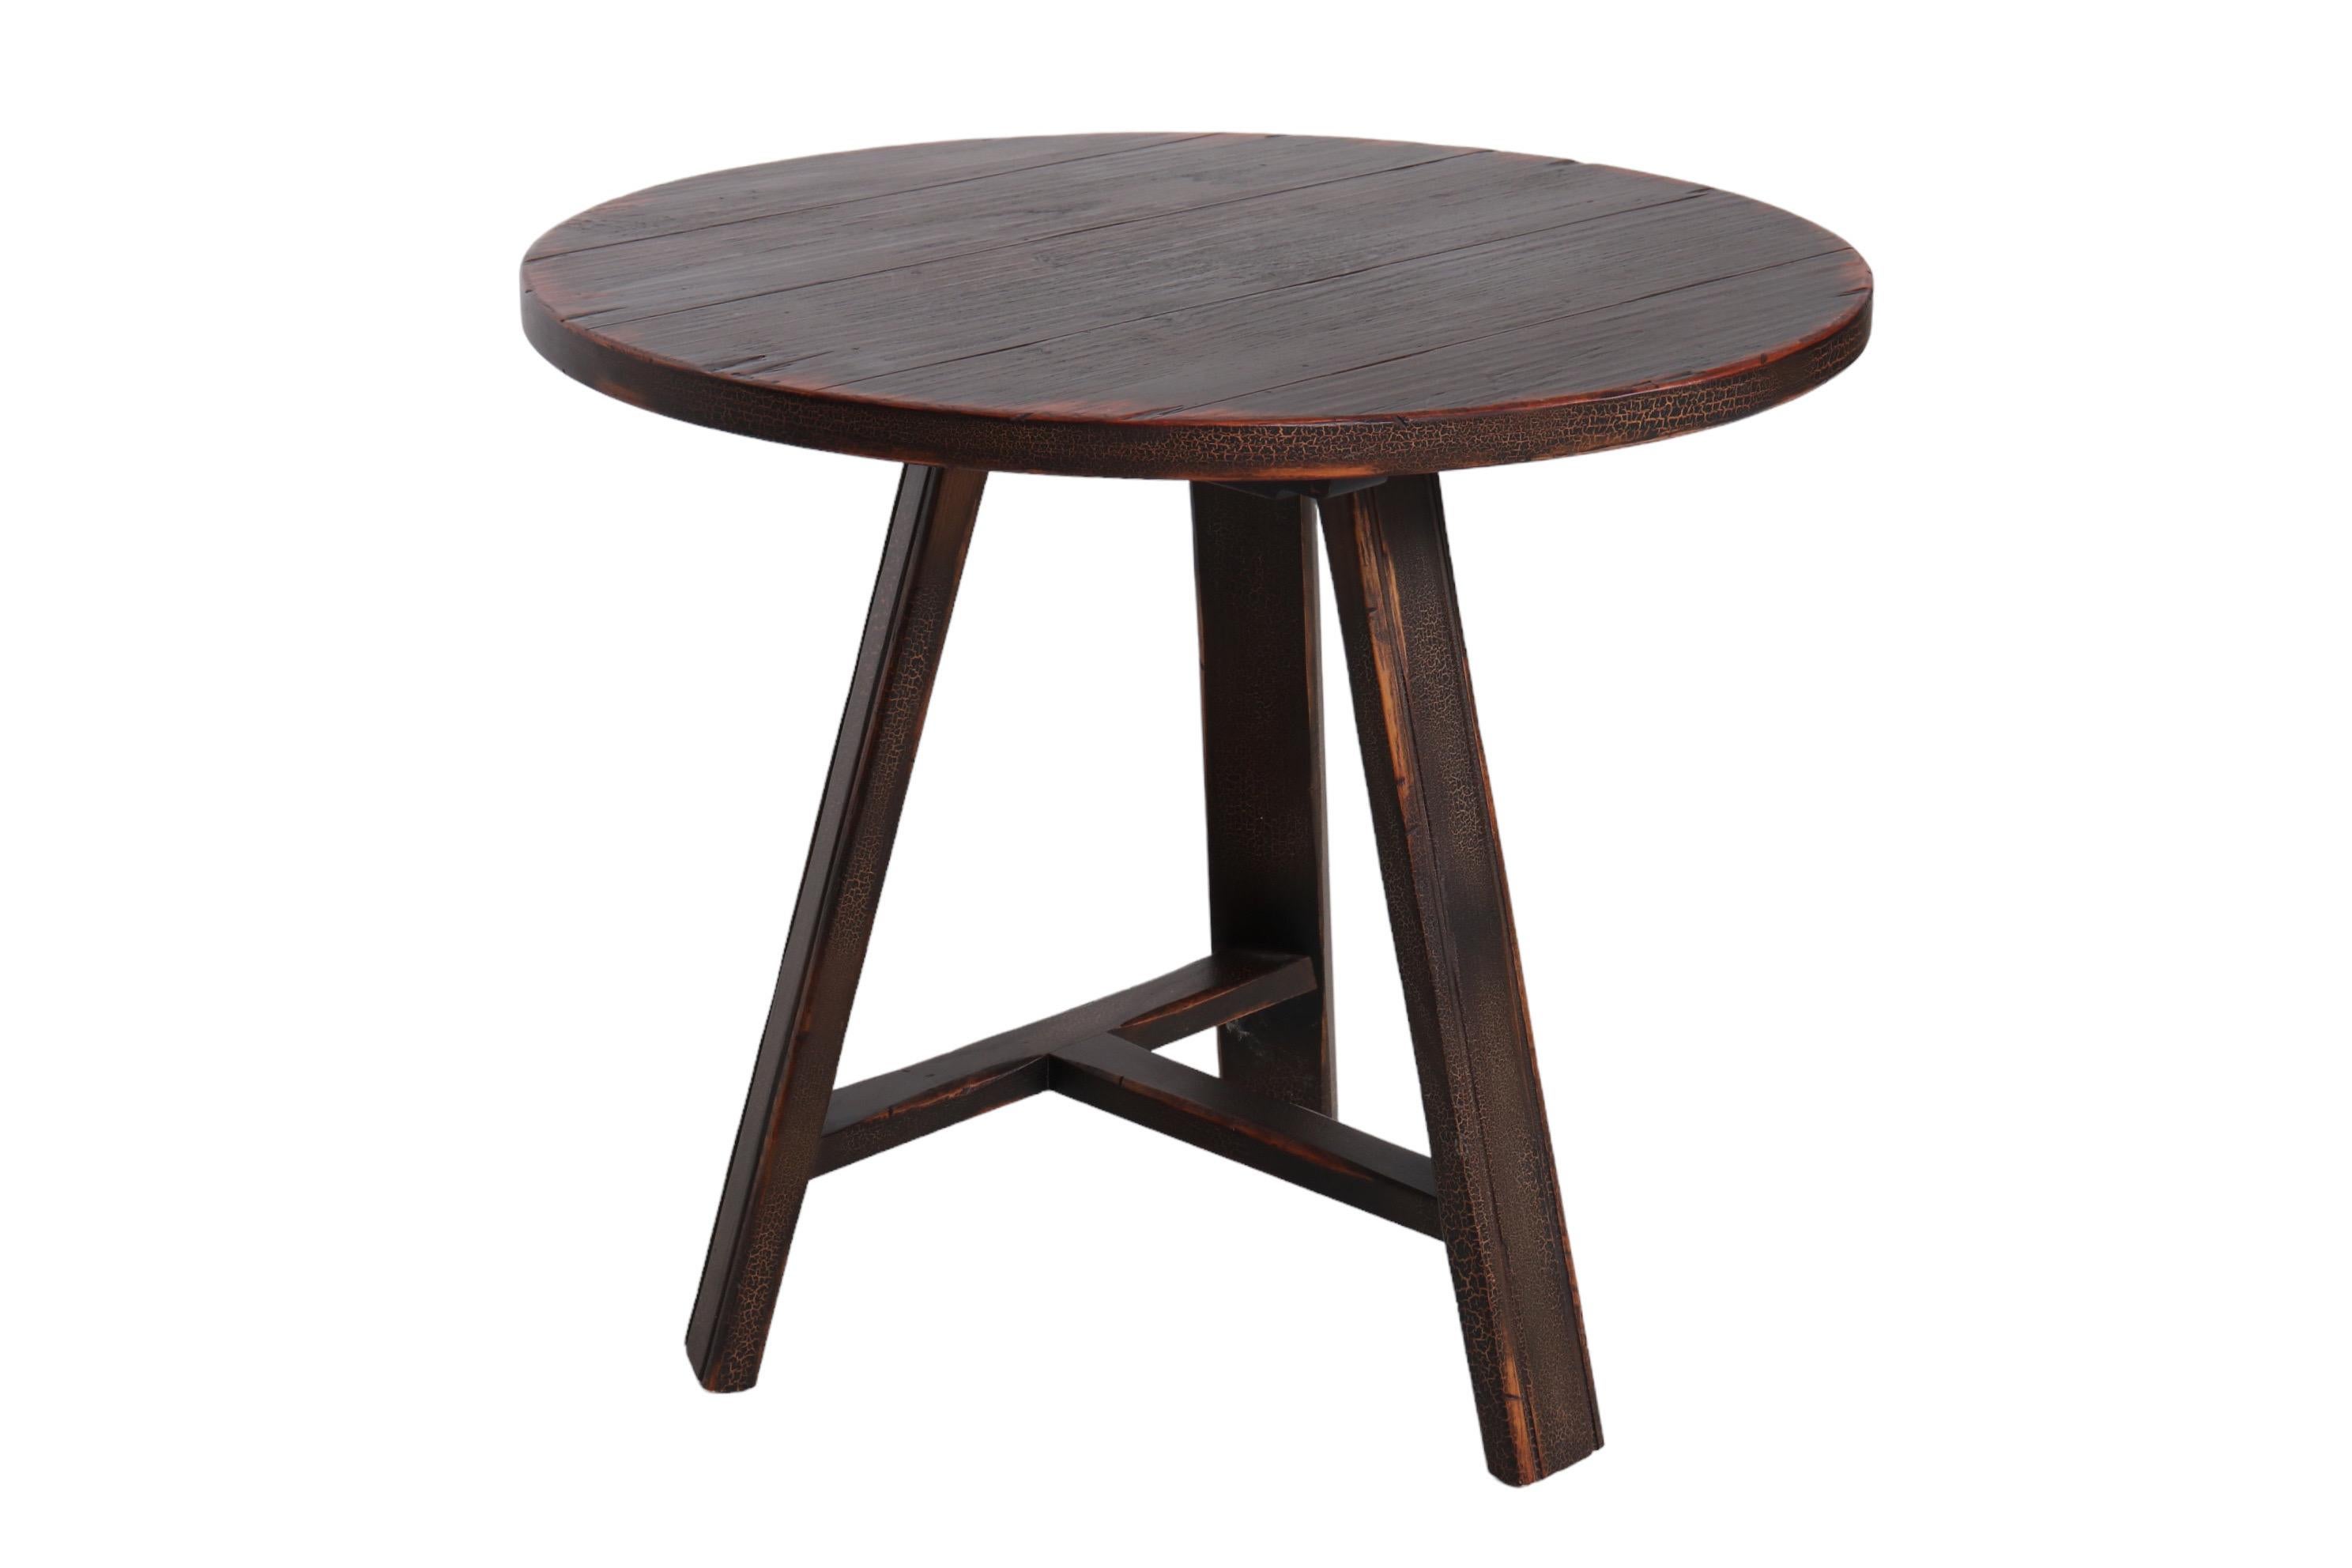 A round wooden accent table made by England Furniture Company of Tennessee. The tabletop is made of planks and stands on three straight legs with beveled edges. Legs are supported with a T-stretcher. Finished throughout with a fired craquelure glaze.